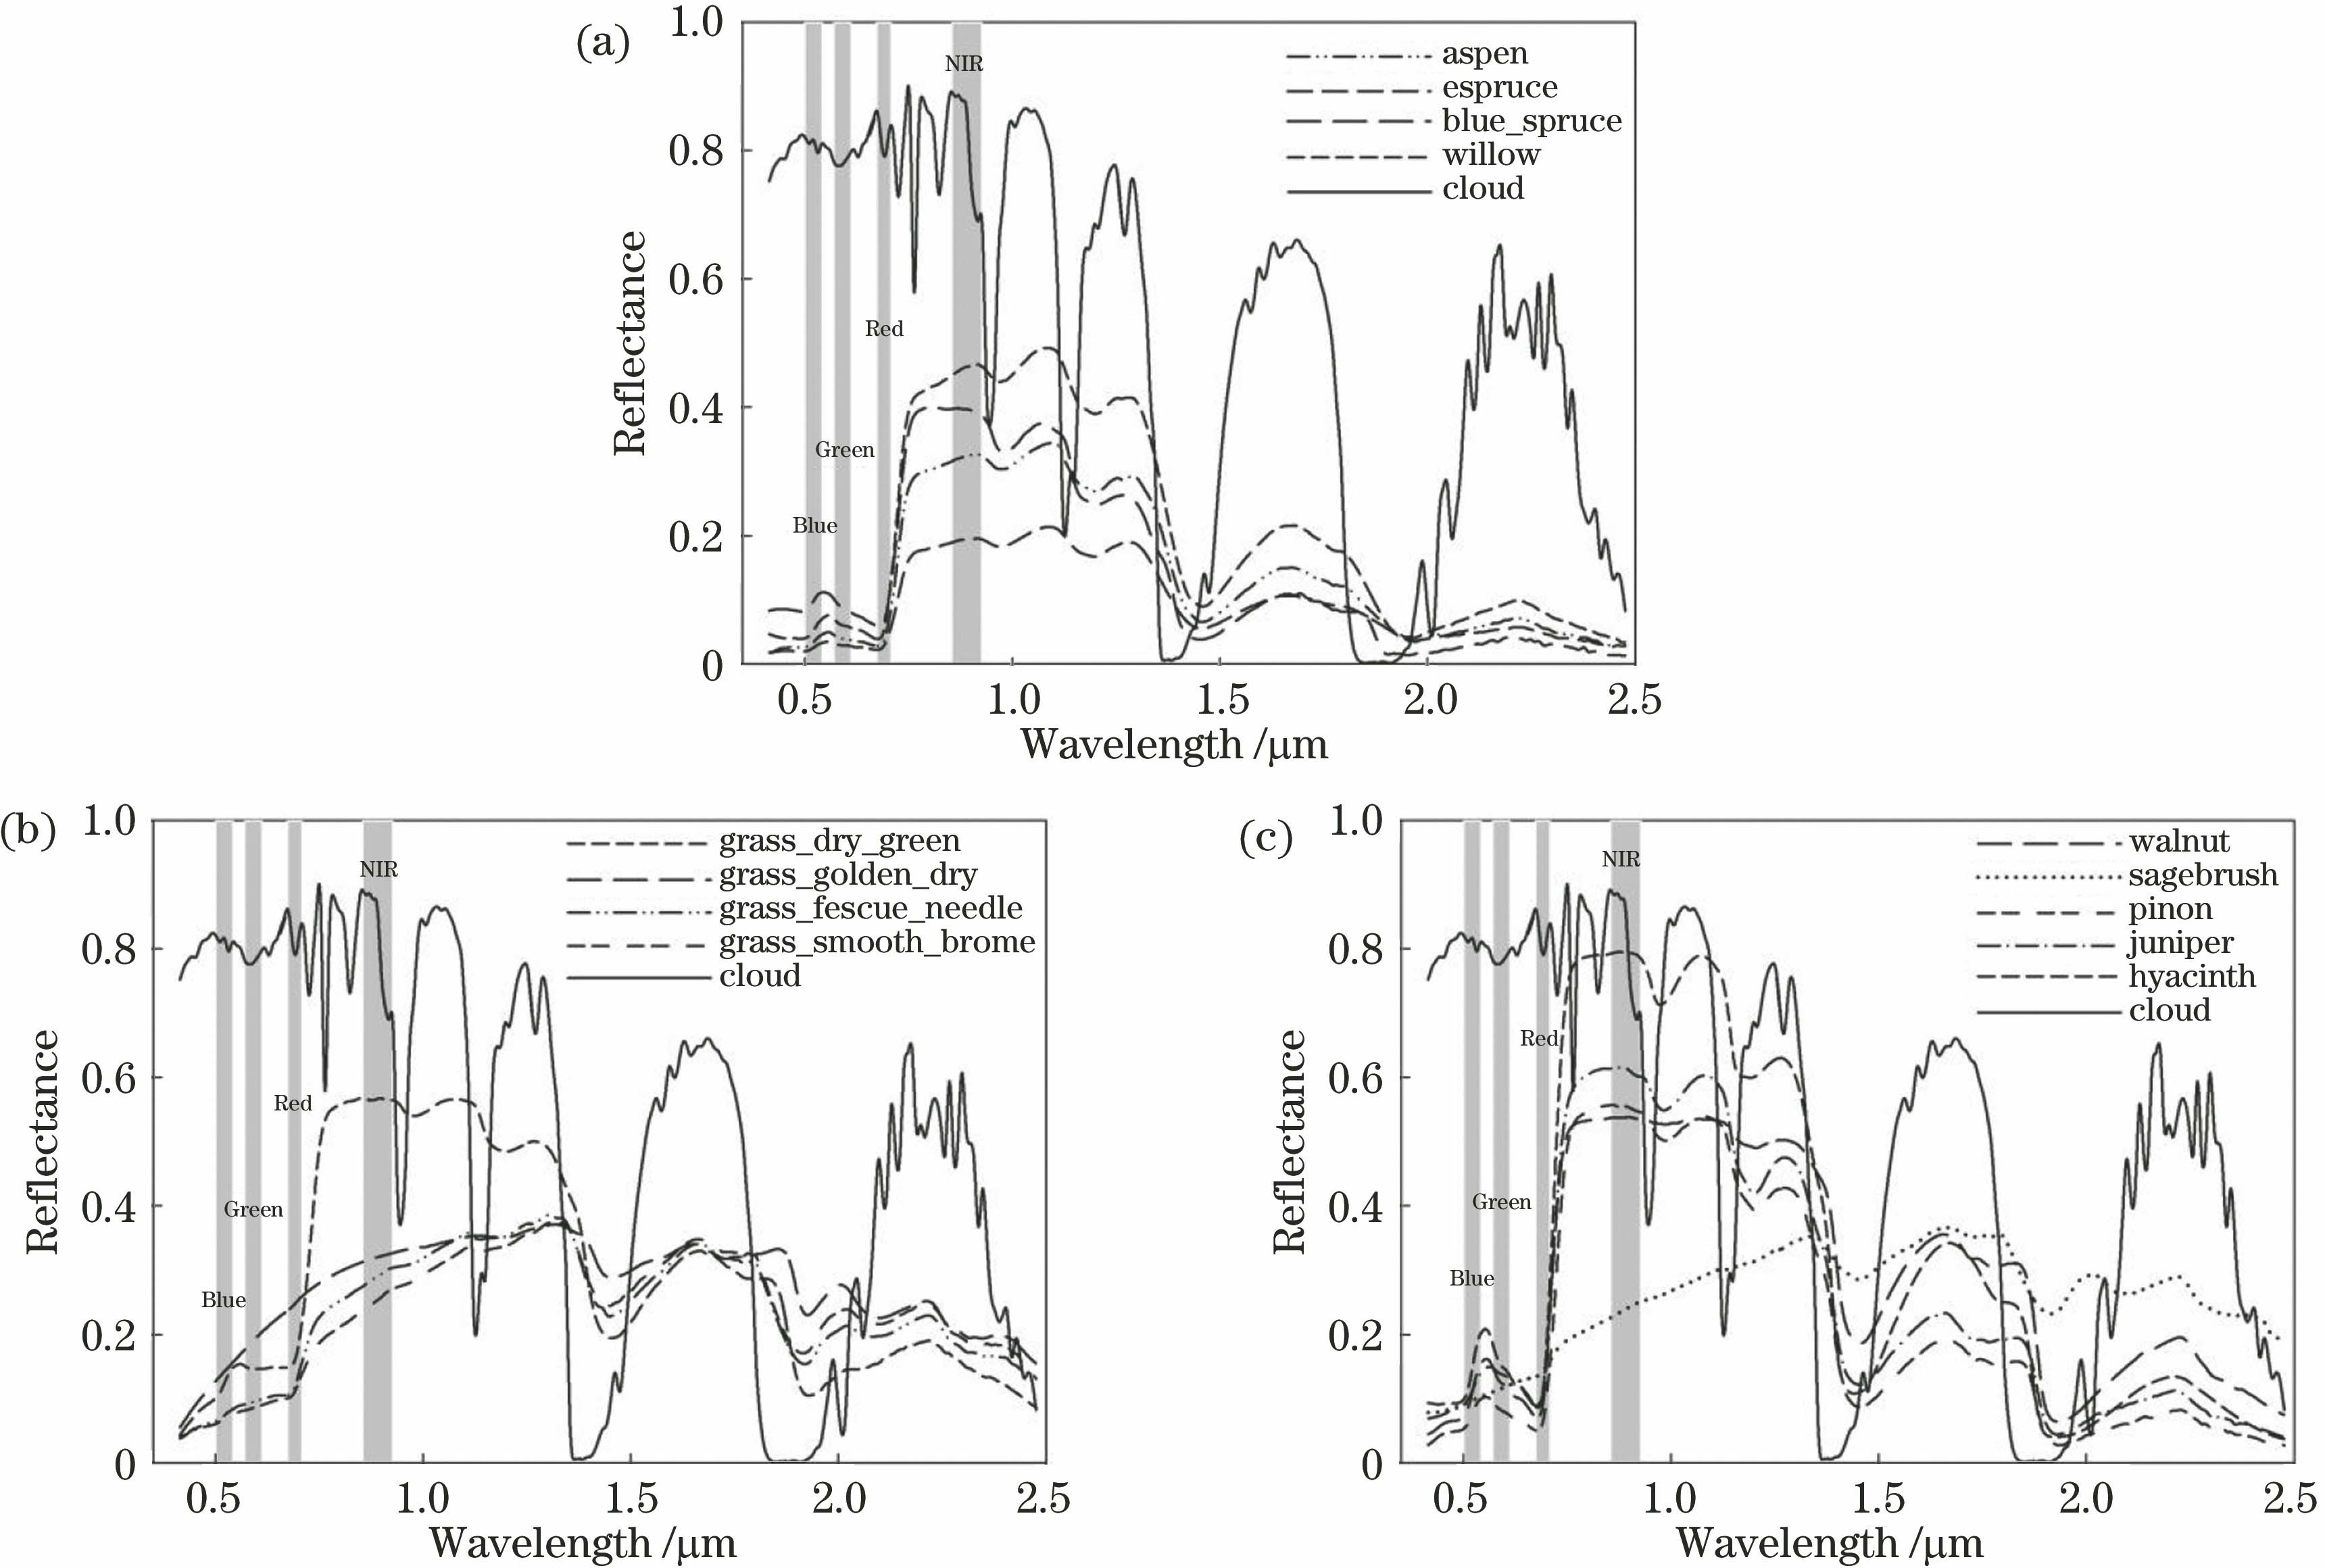 Surface reflectance characteristics of spatiotemporal series. (a) Forest; (b) grassland; (c) shrubland